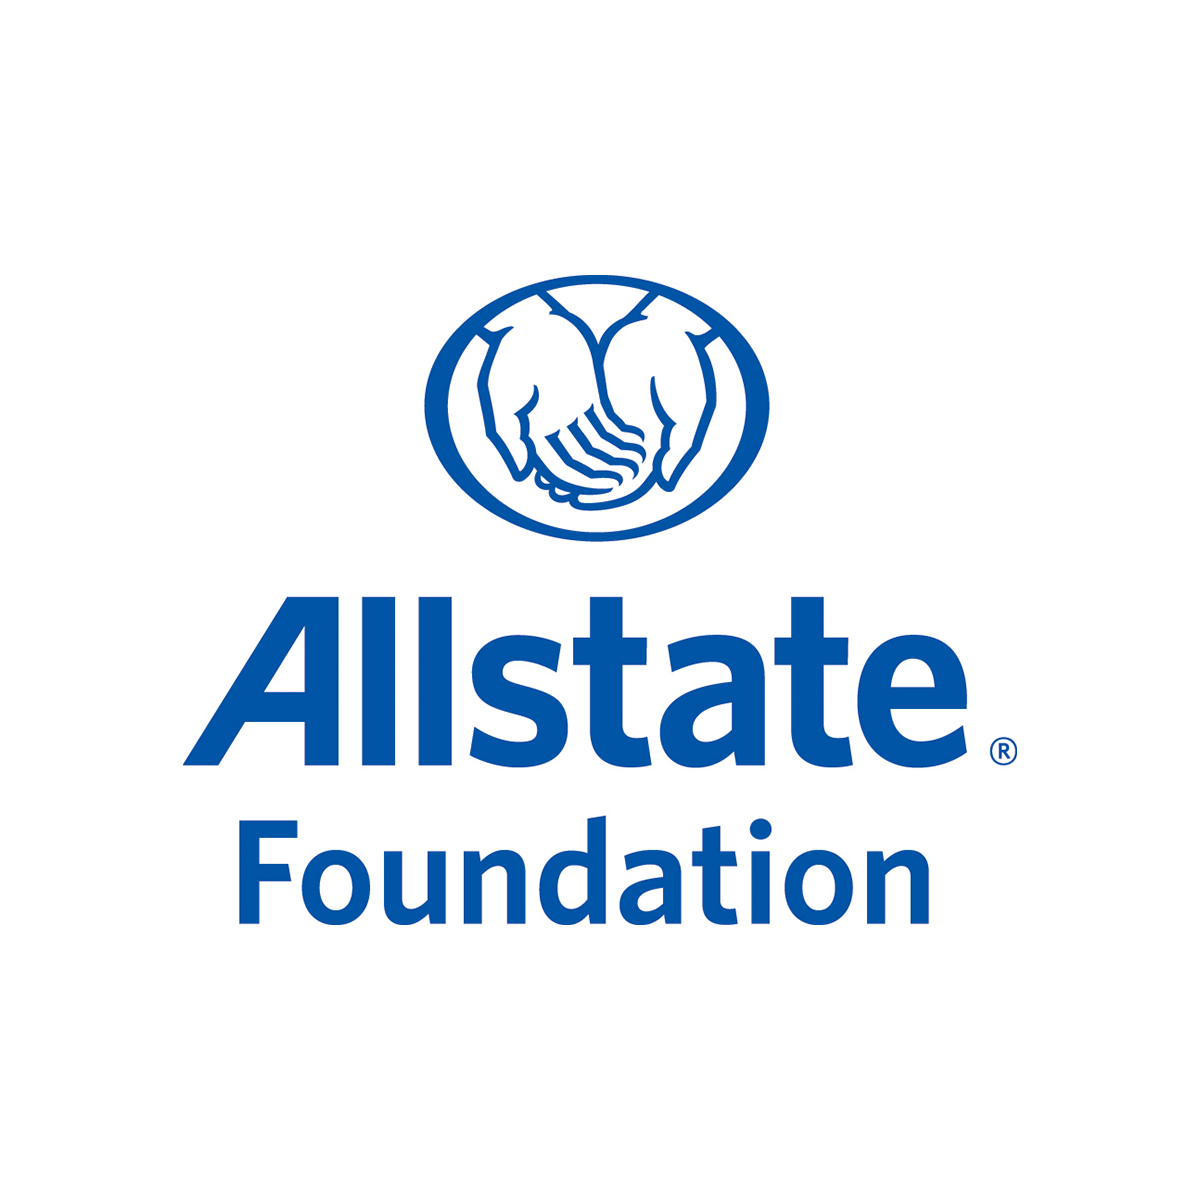 Youth Tell Underrepresented Relationship Stories Through Short Films: One Love uses new Allstate Foundation grant to uplift People of Color and LGBTQ+ voices through youth-led film fellowship